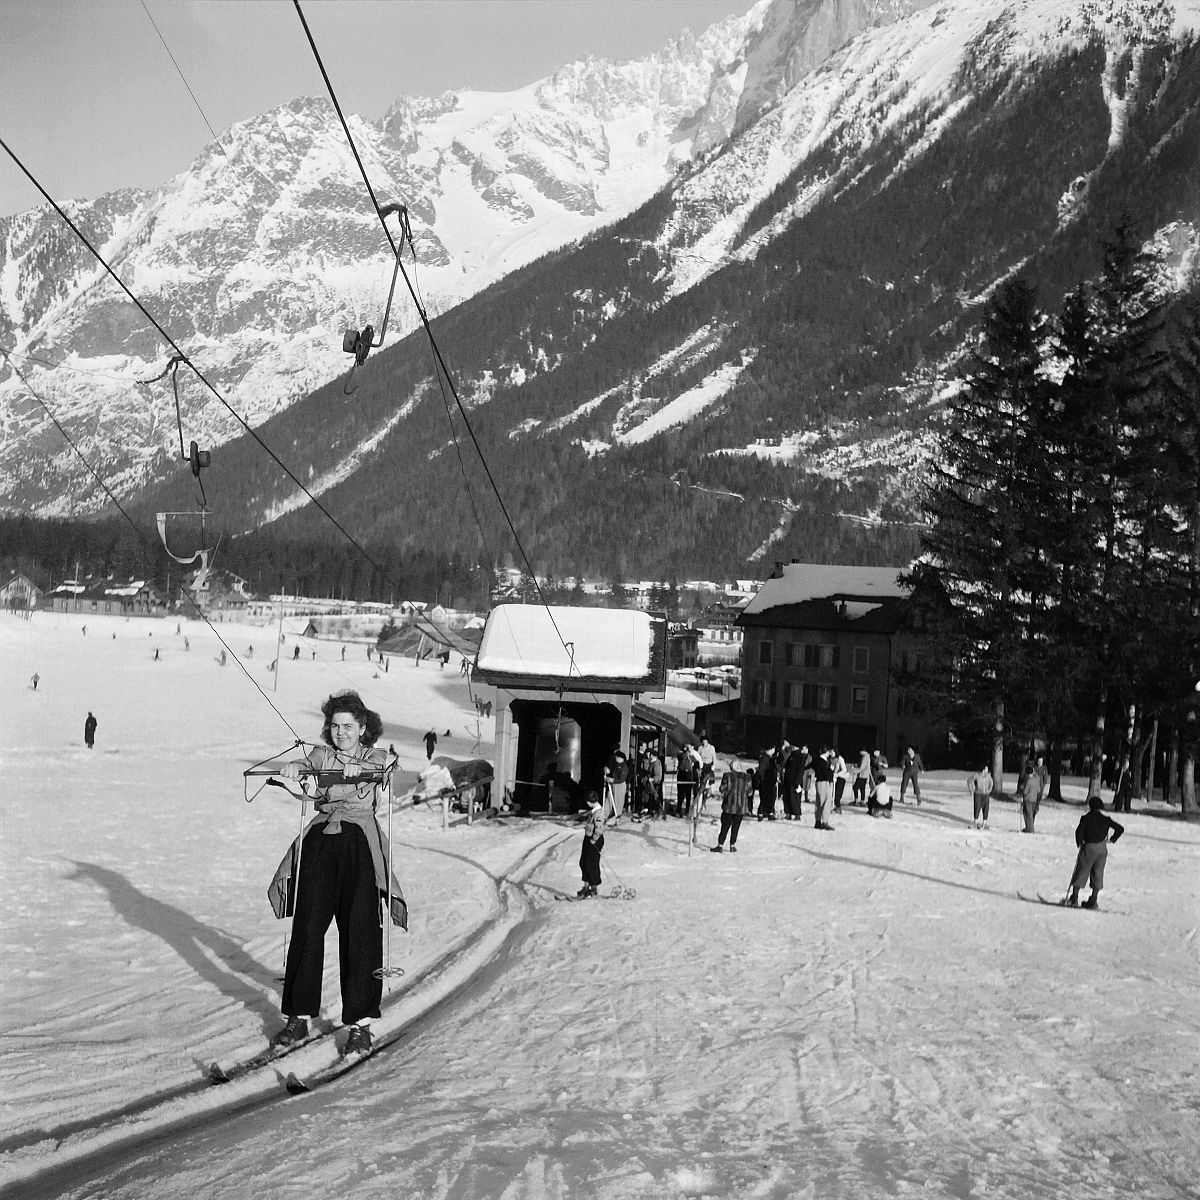 In pictures: These vintage shots from the snow will get you in the mood ...